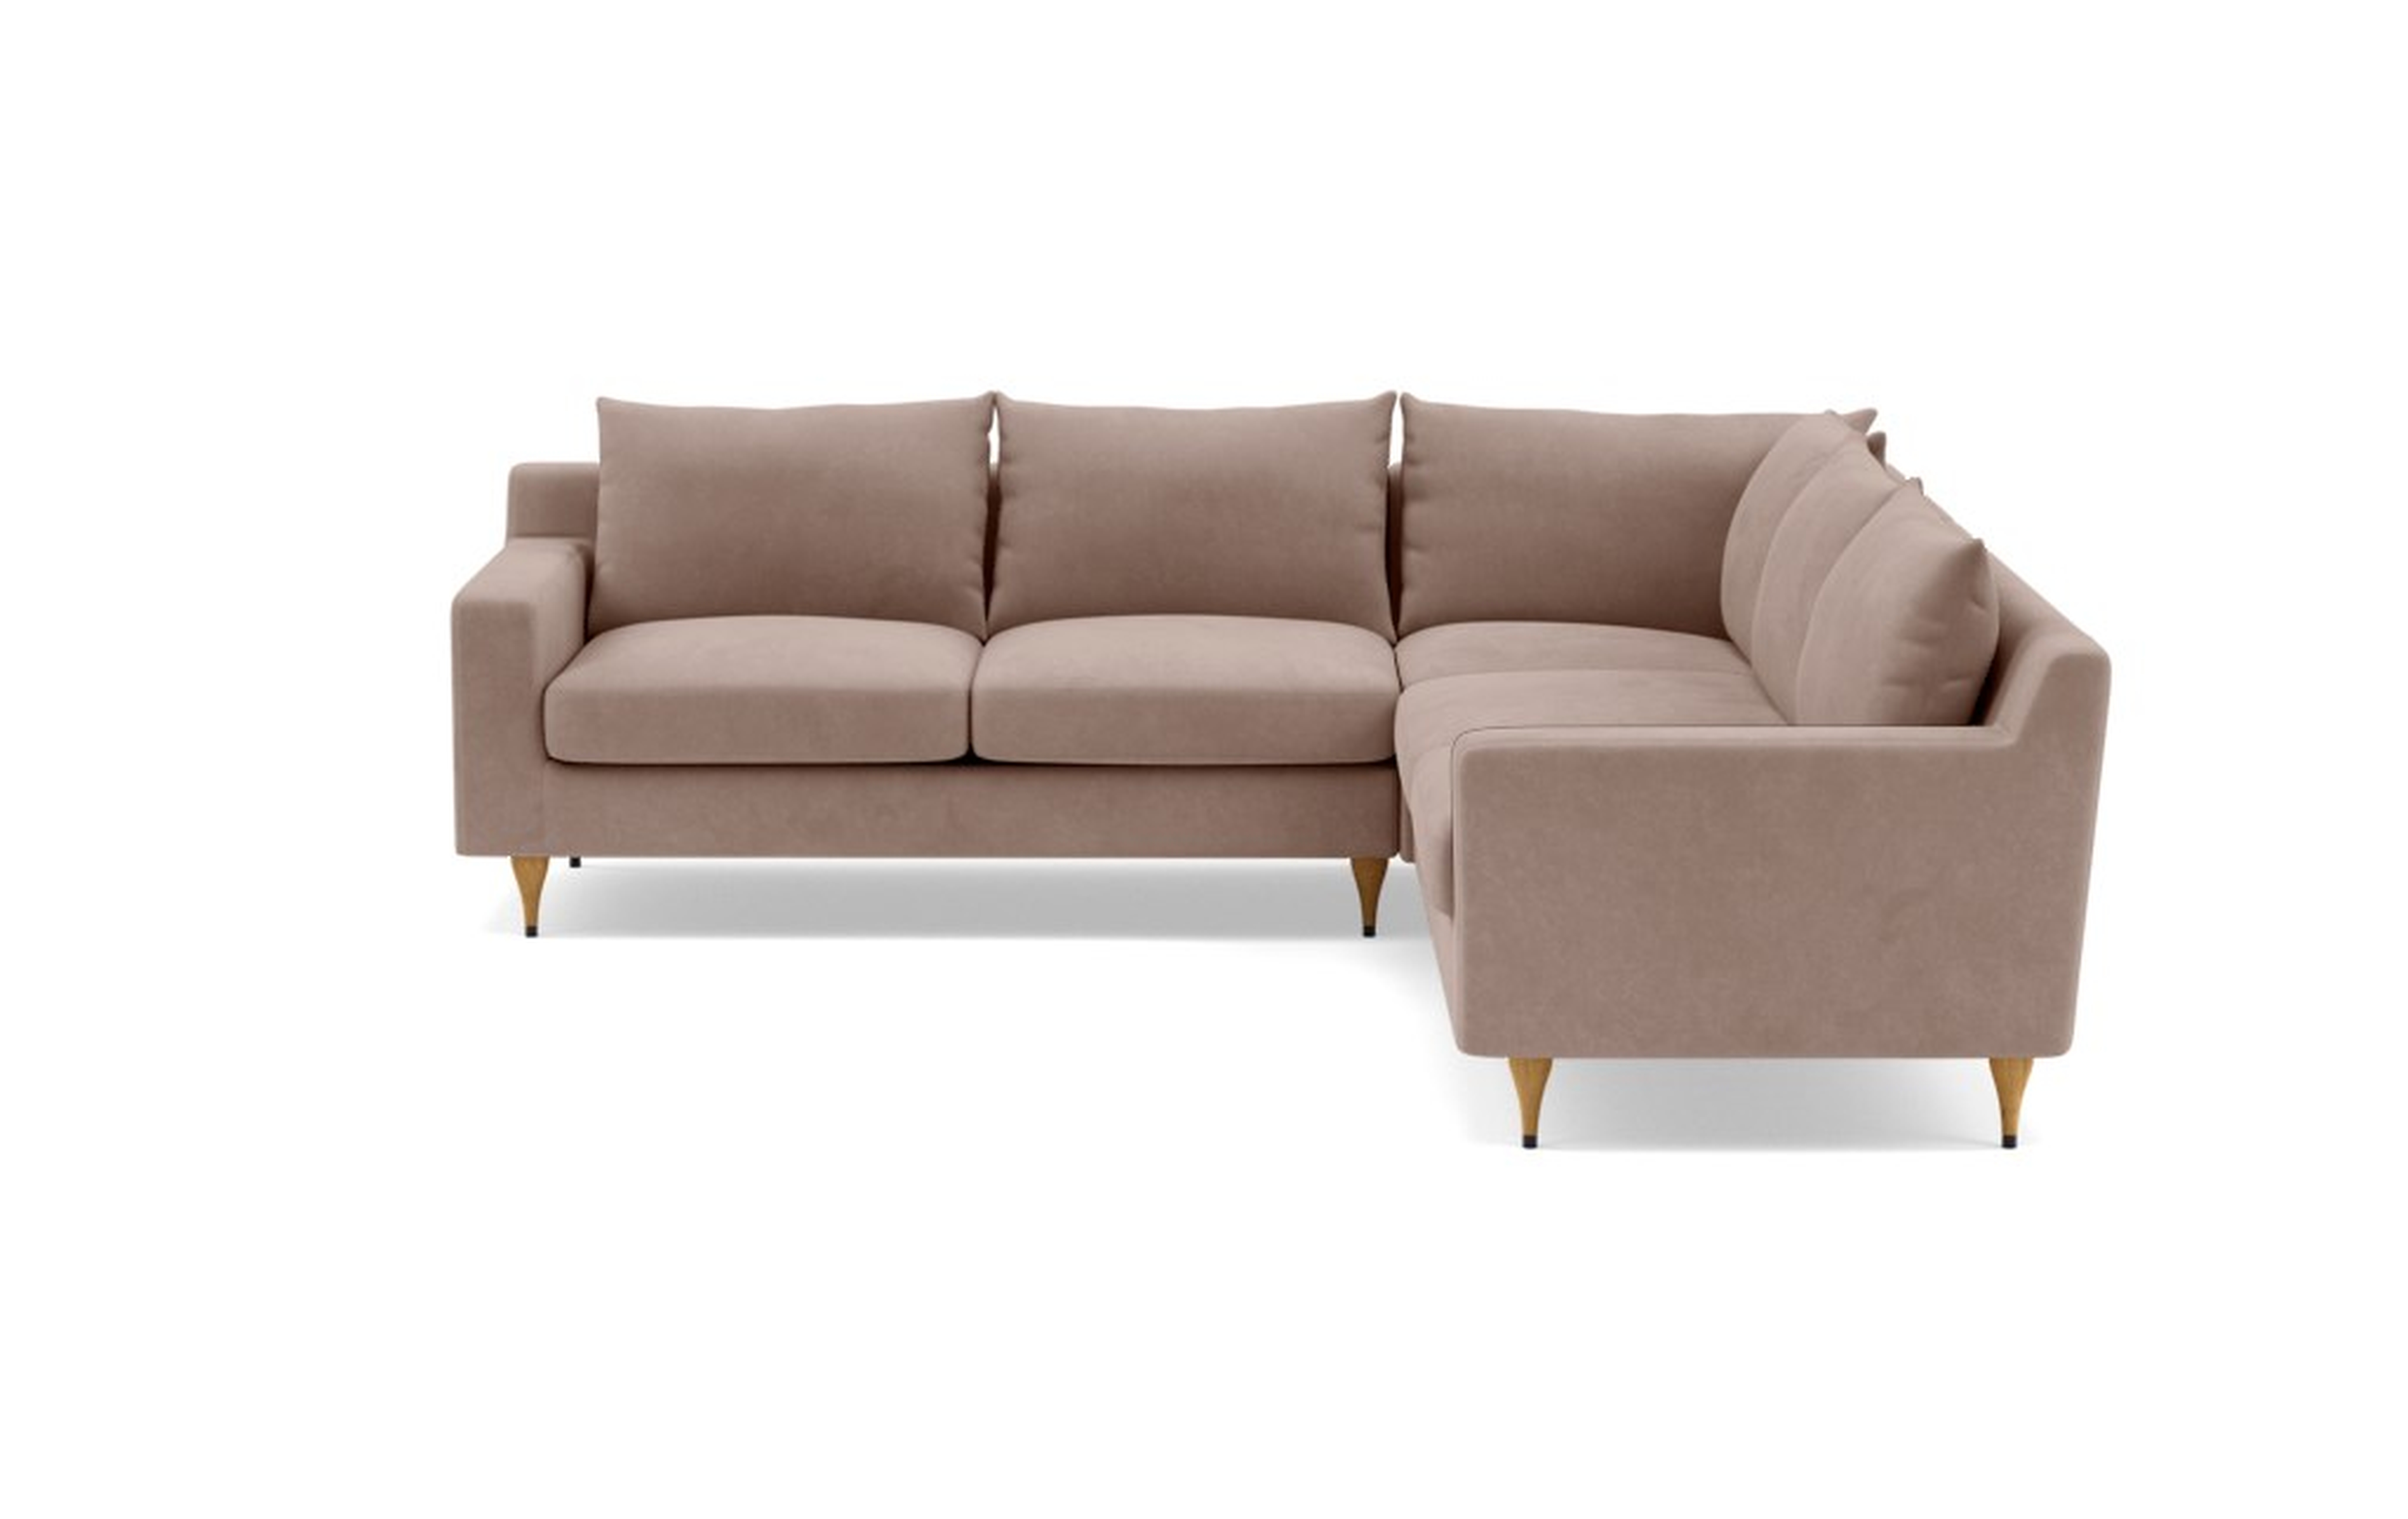 Sloan Corner Sectional with Platinum Performance Velvet Fabric and Natural Oak with Antique Cap legs - Interior Define